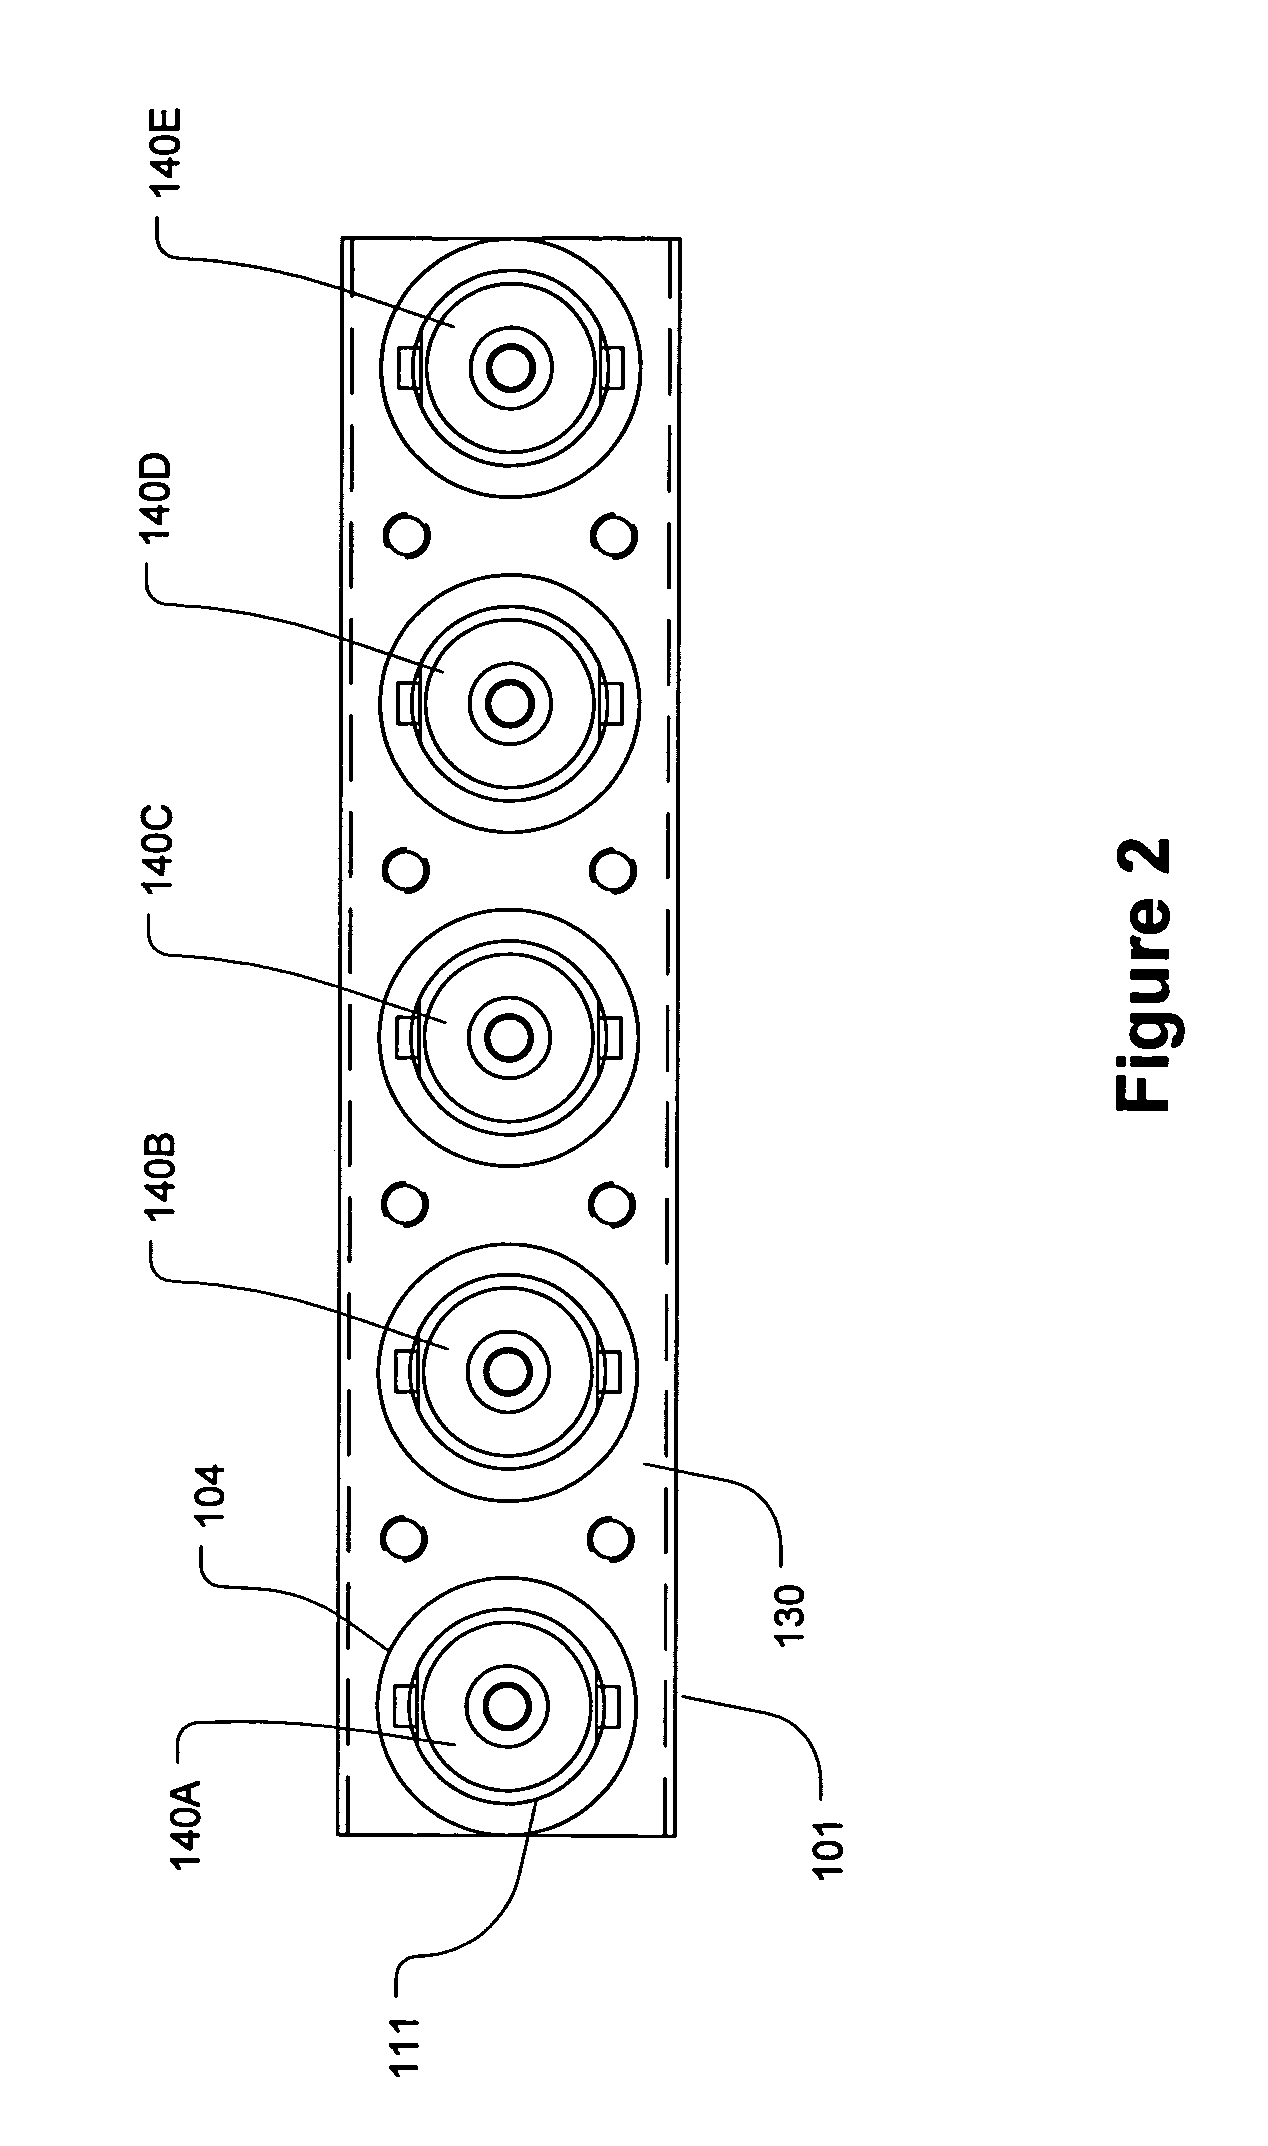 Connector assembly apparatus for electronic equipment and method for using same